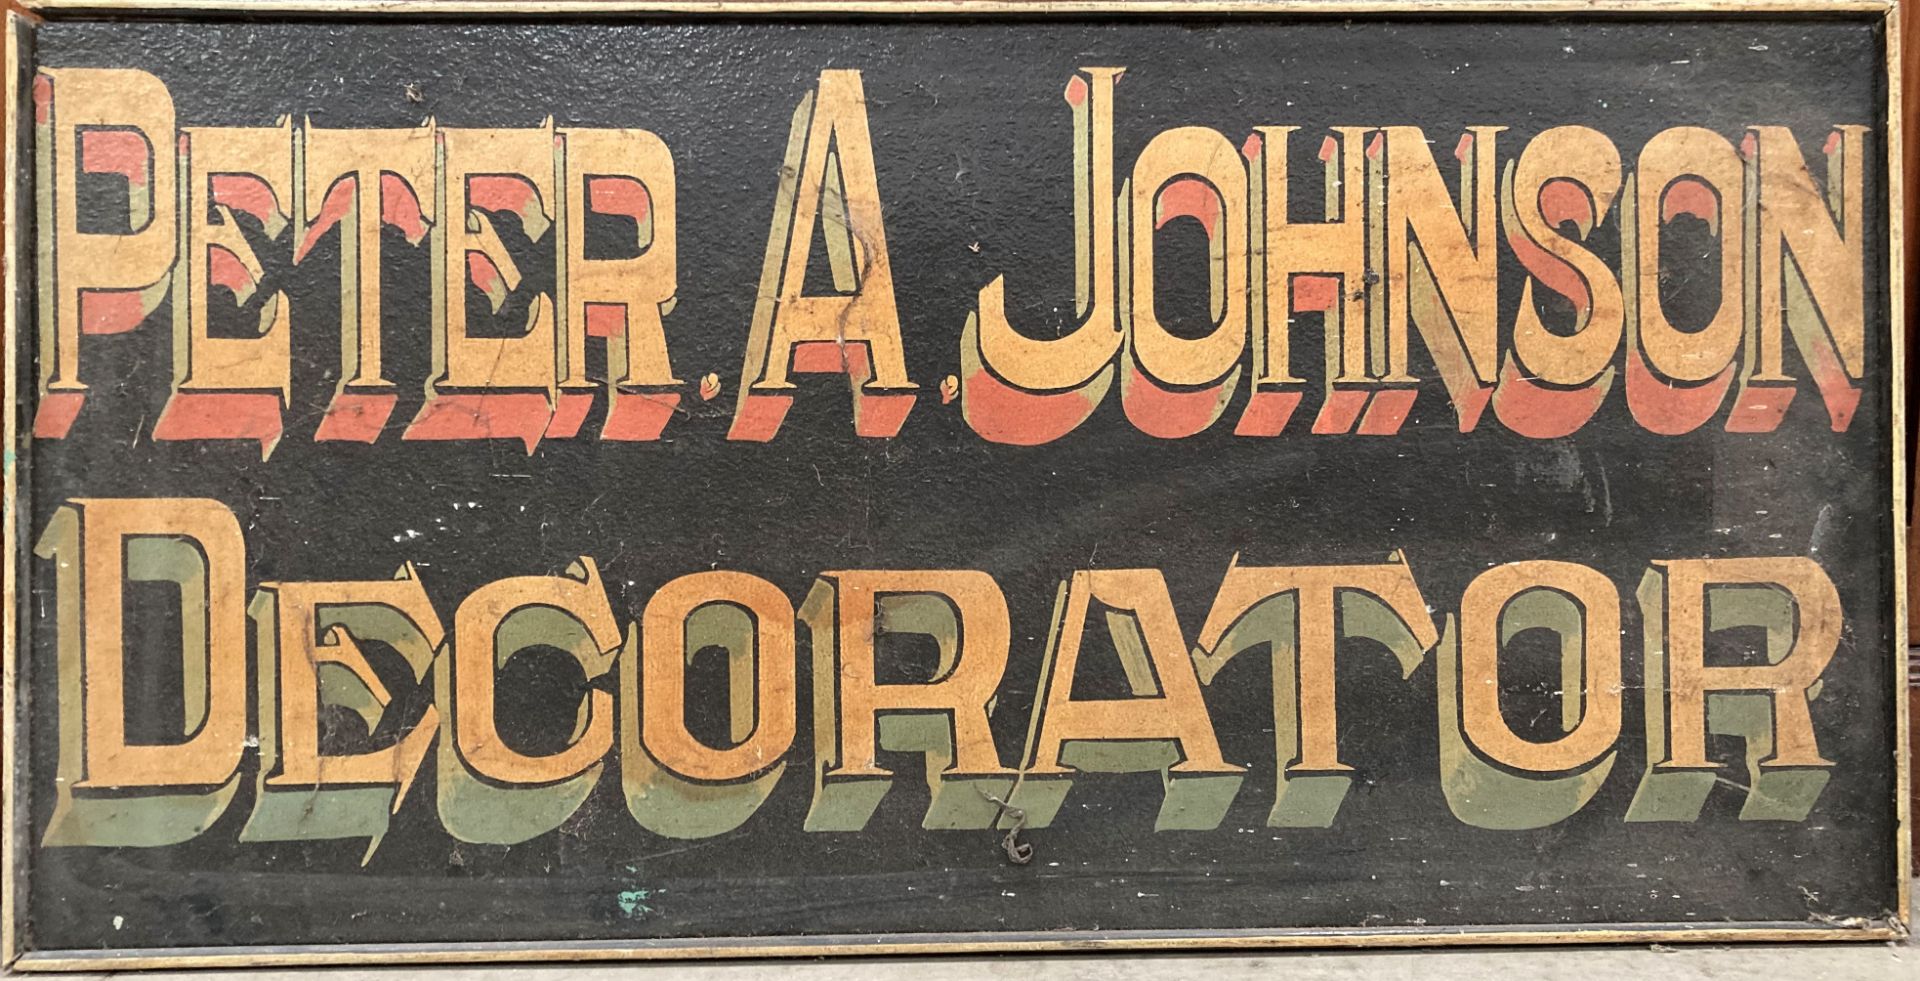 Two hand painted wall mounting signs 'Peter A Johnson Decorator' one 93 x 47cm and one 83 x 39cm